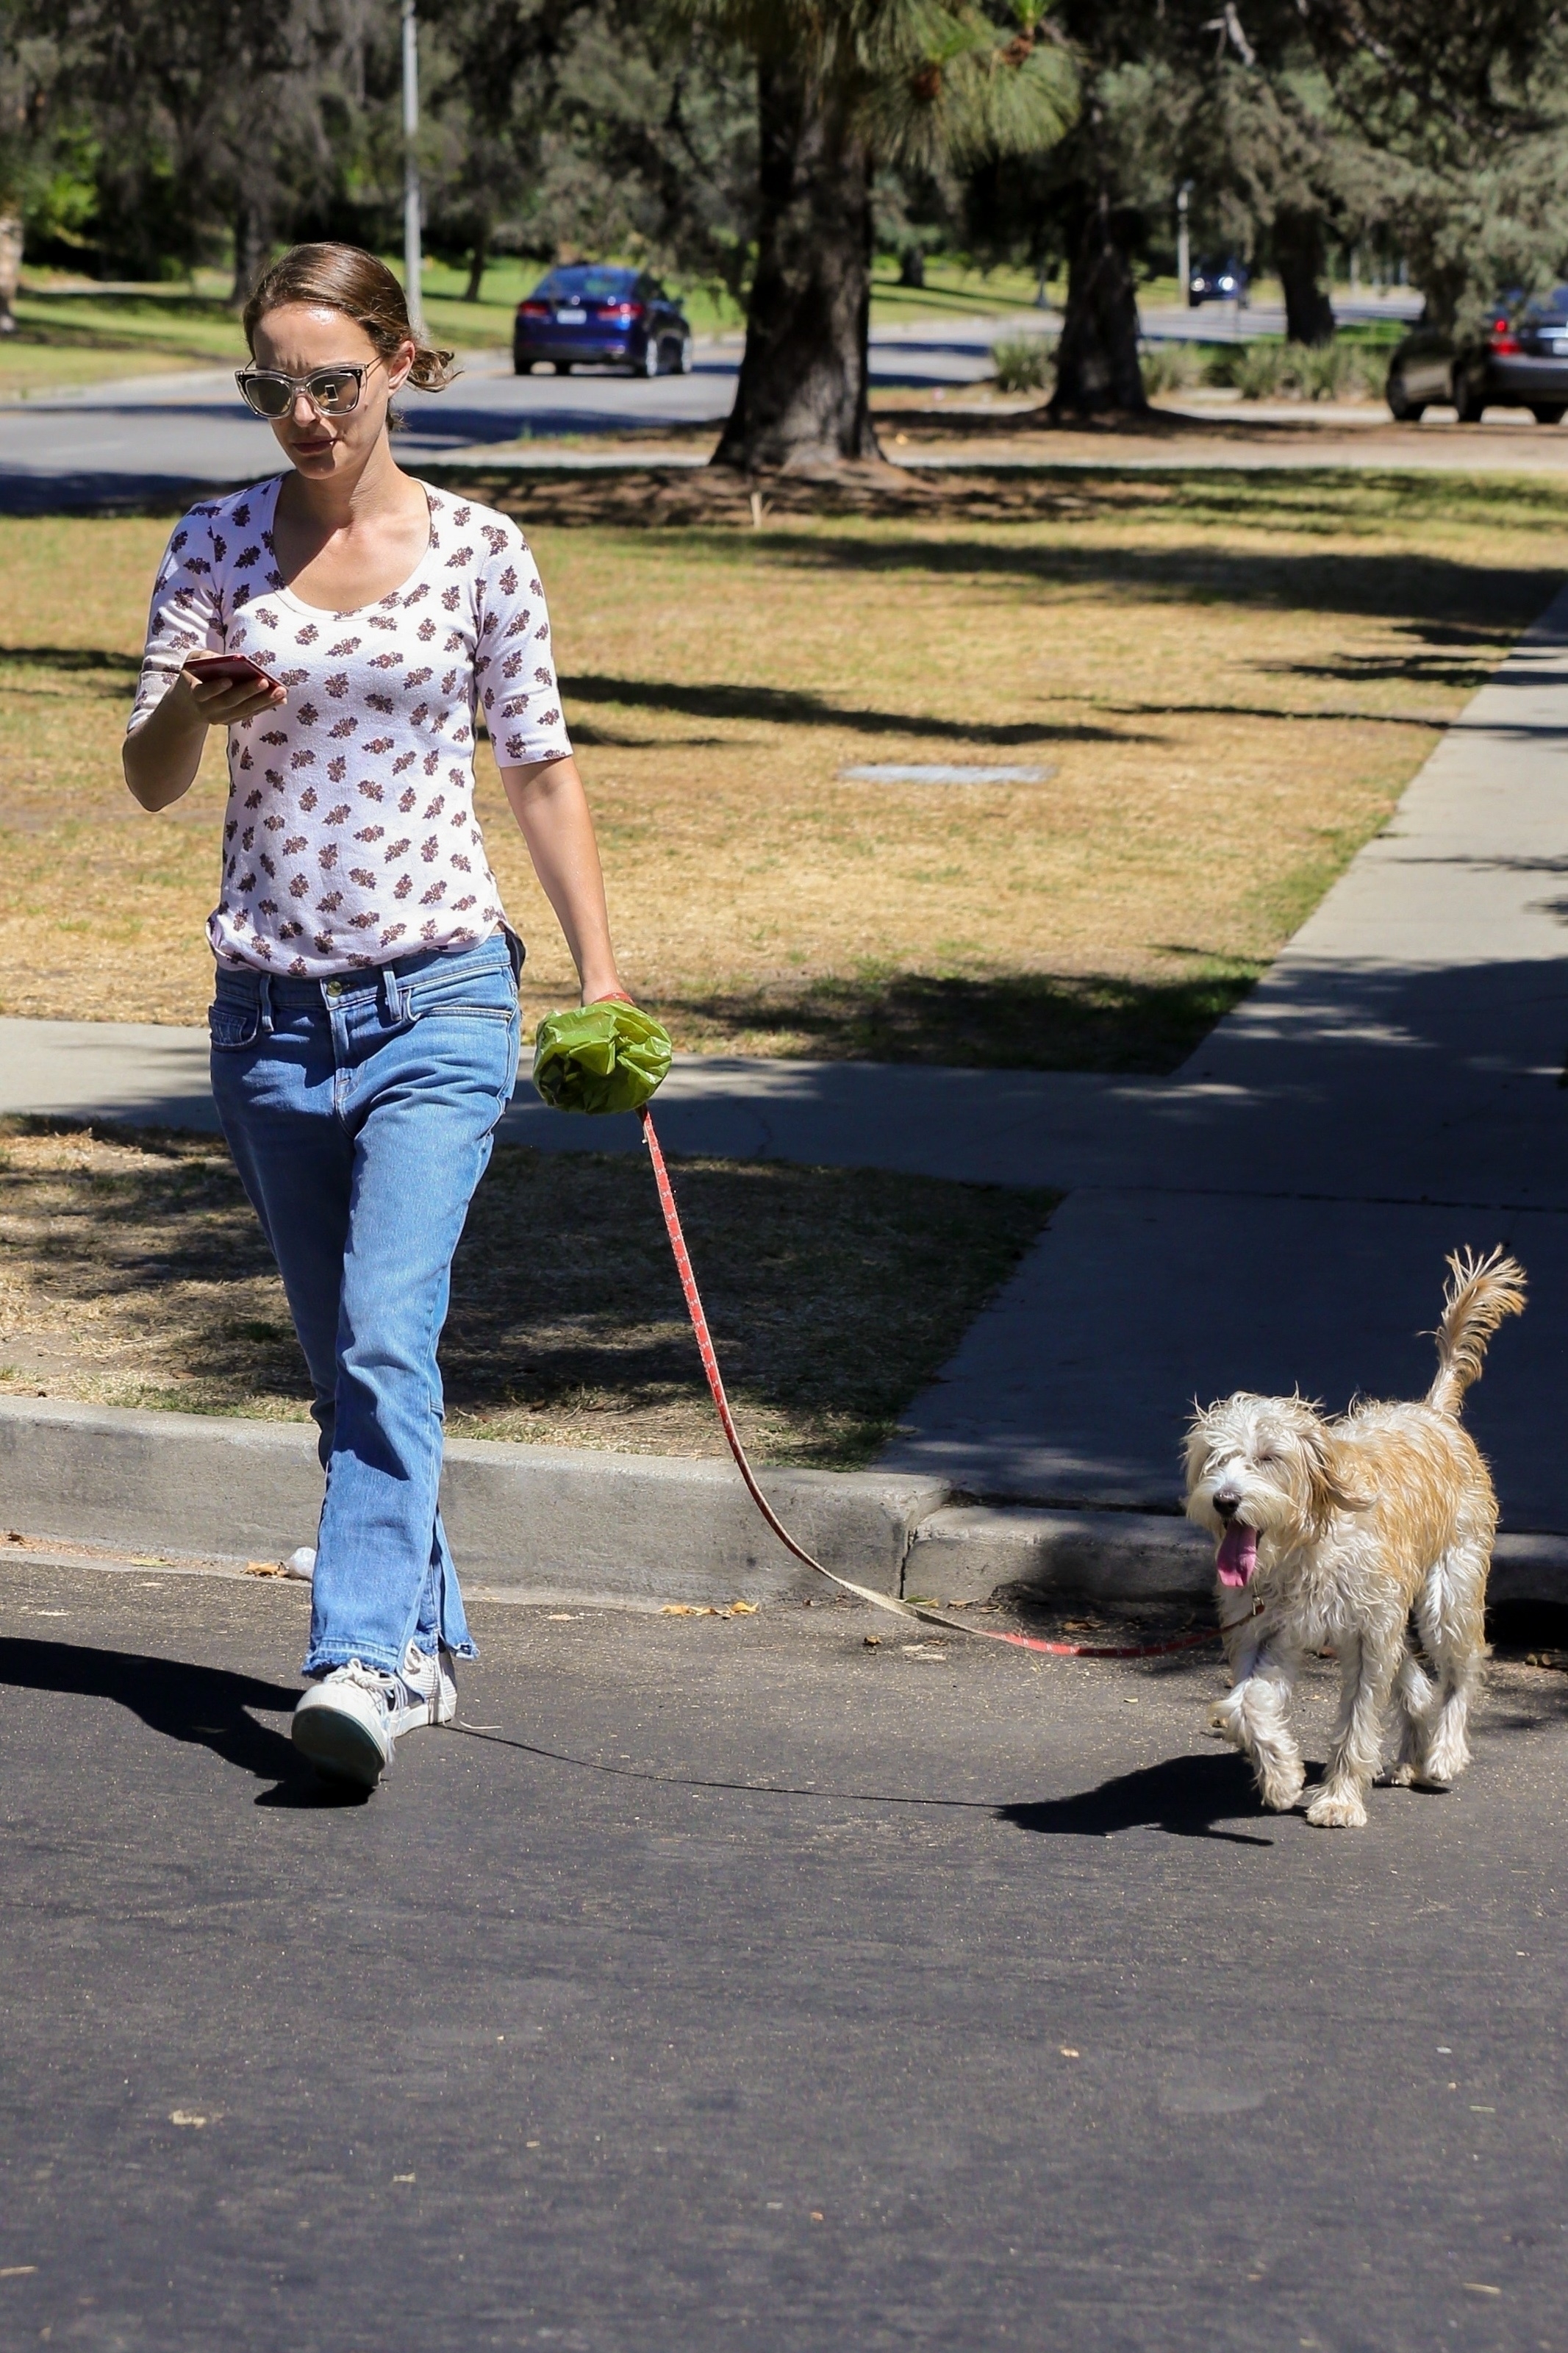 natalie-portman-out-for-a-walk-with-her-dog-near-griffith-park-in-los-feliz-09172018-16.jpg